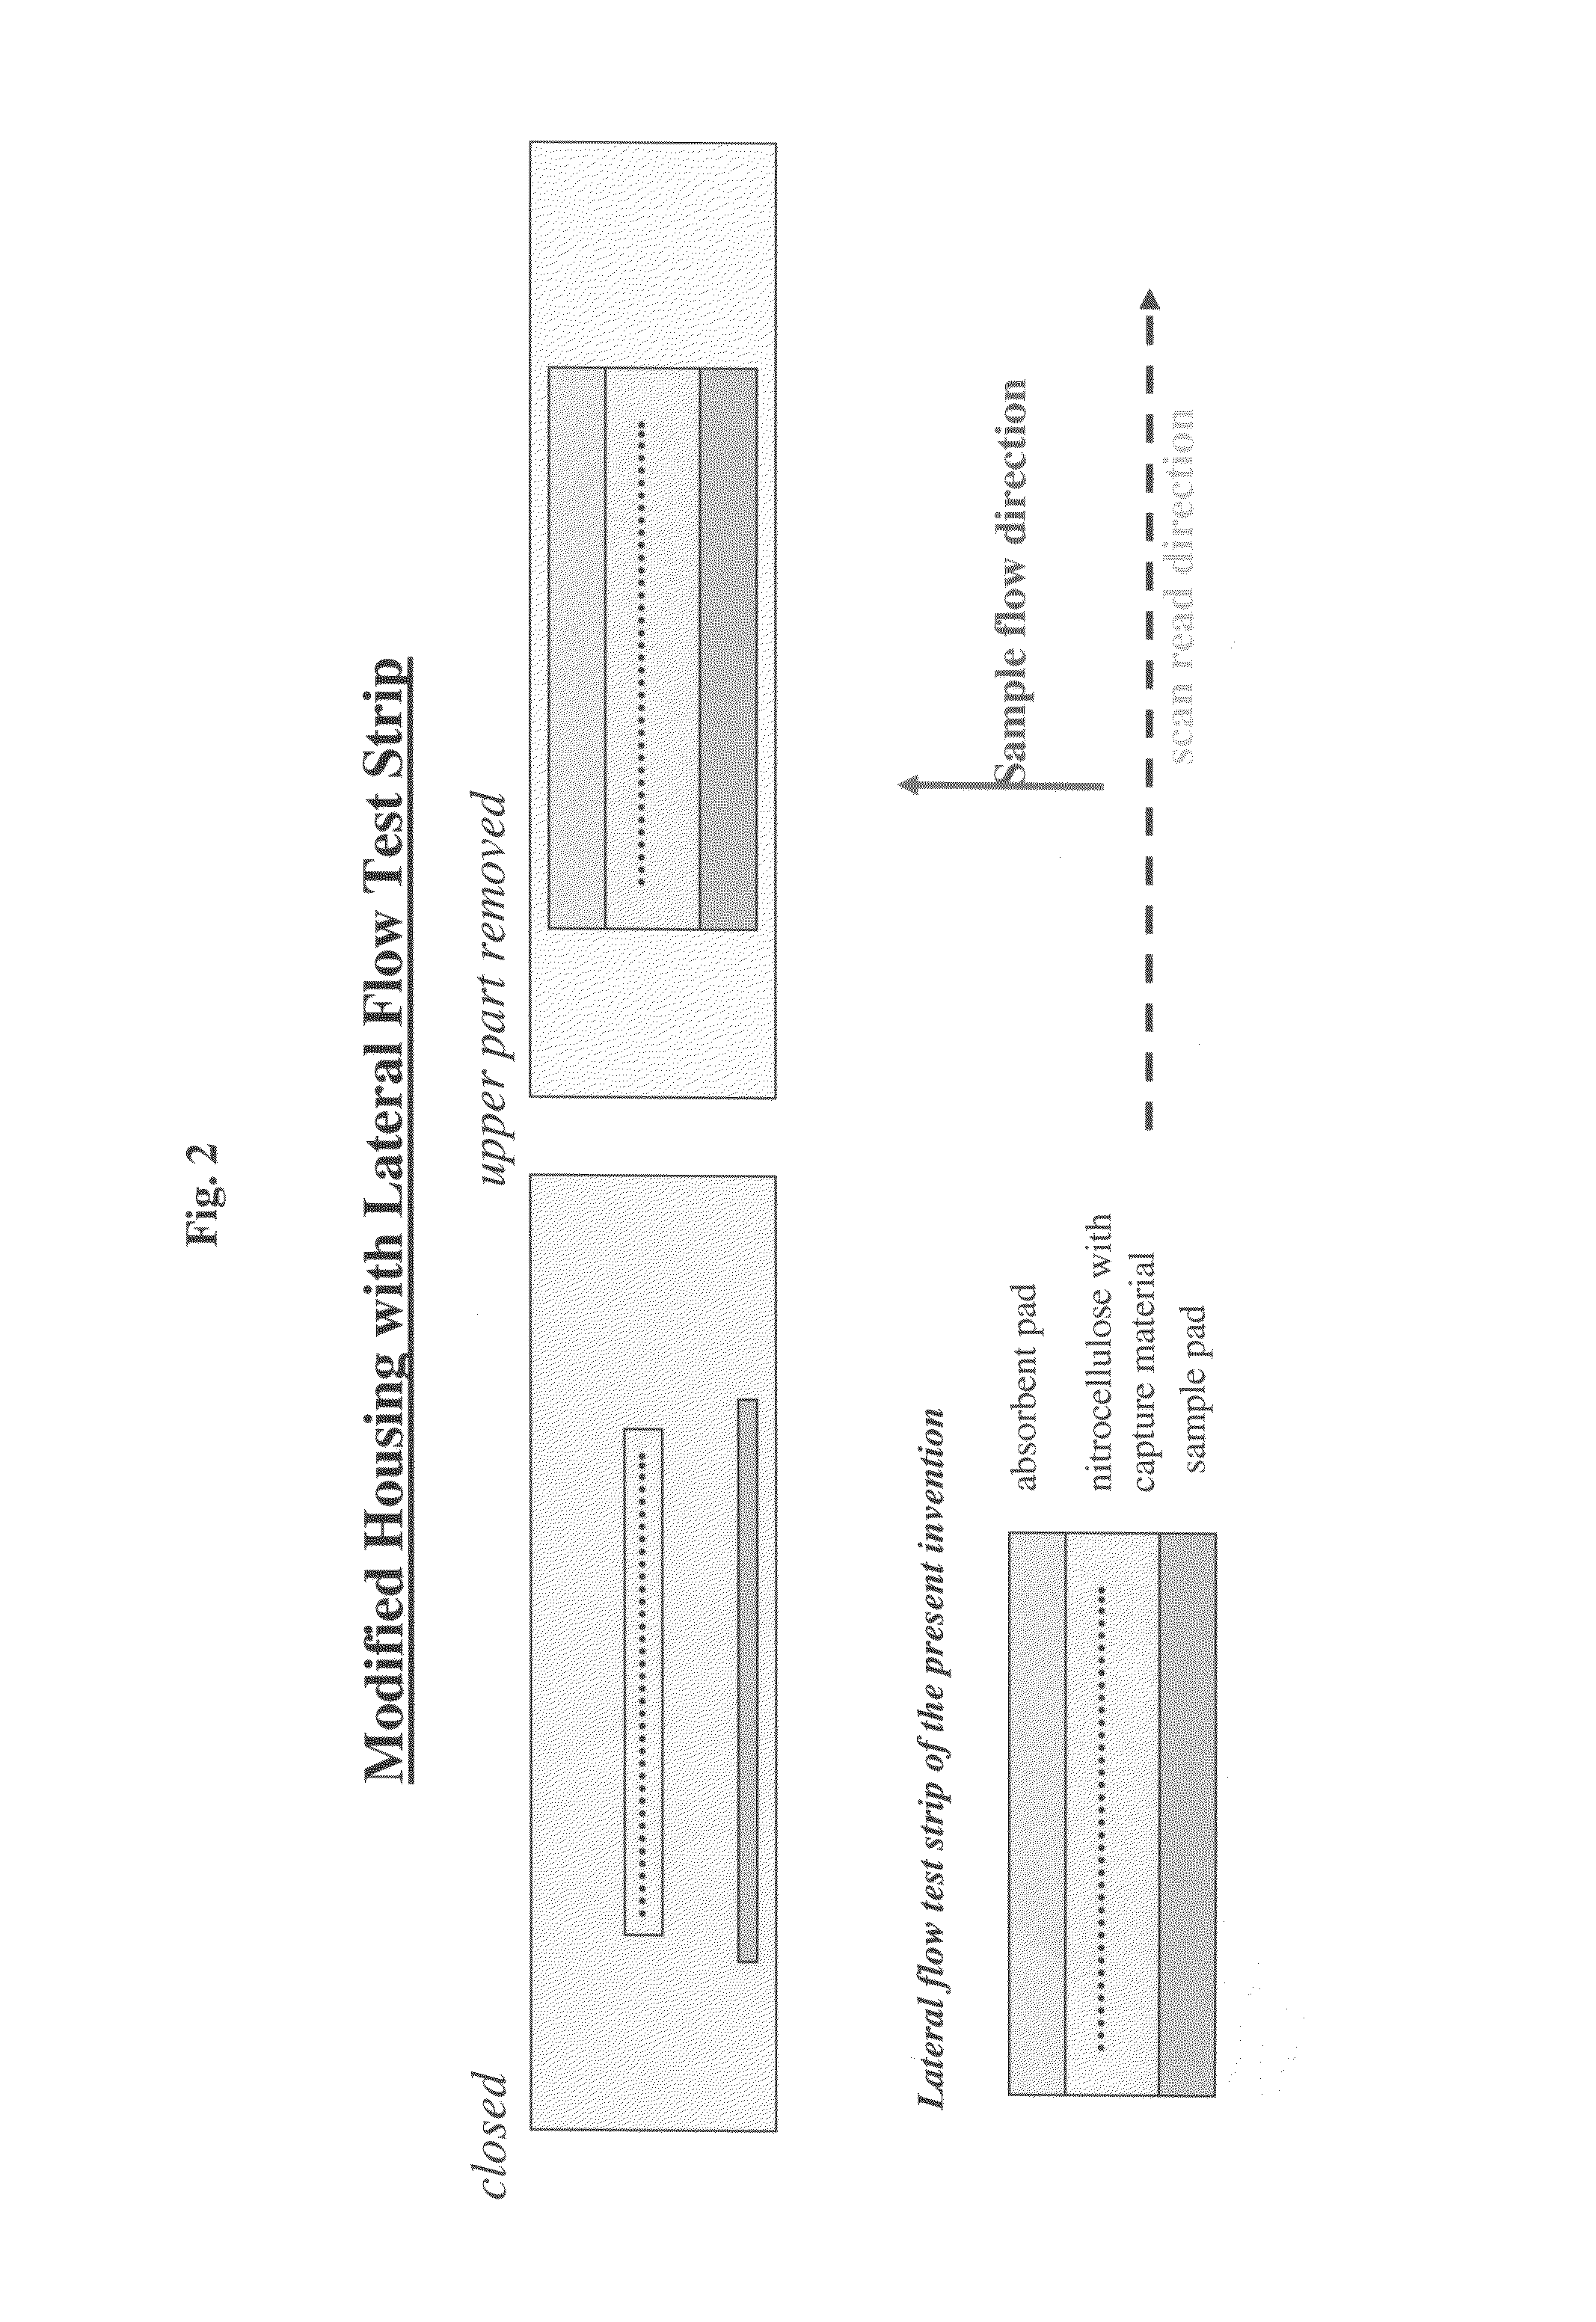 Lateral flow assay device with multiple equidistant capture zones